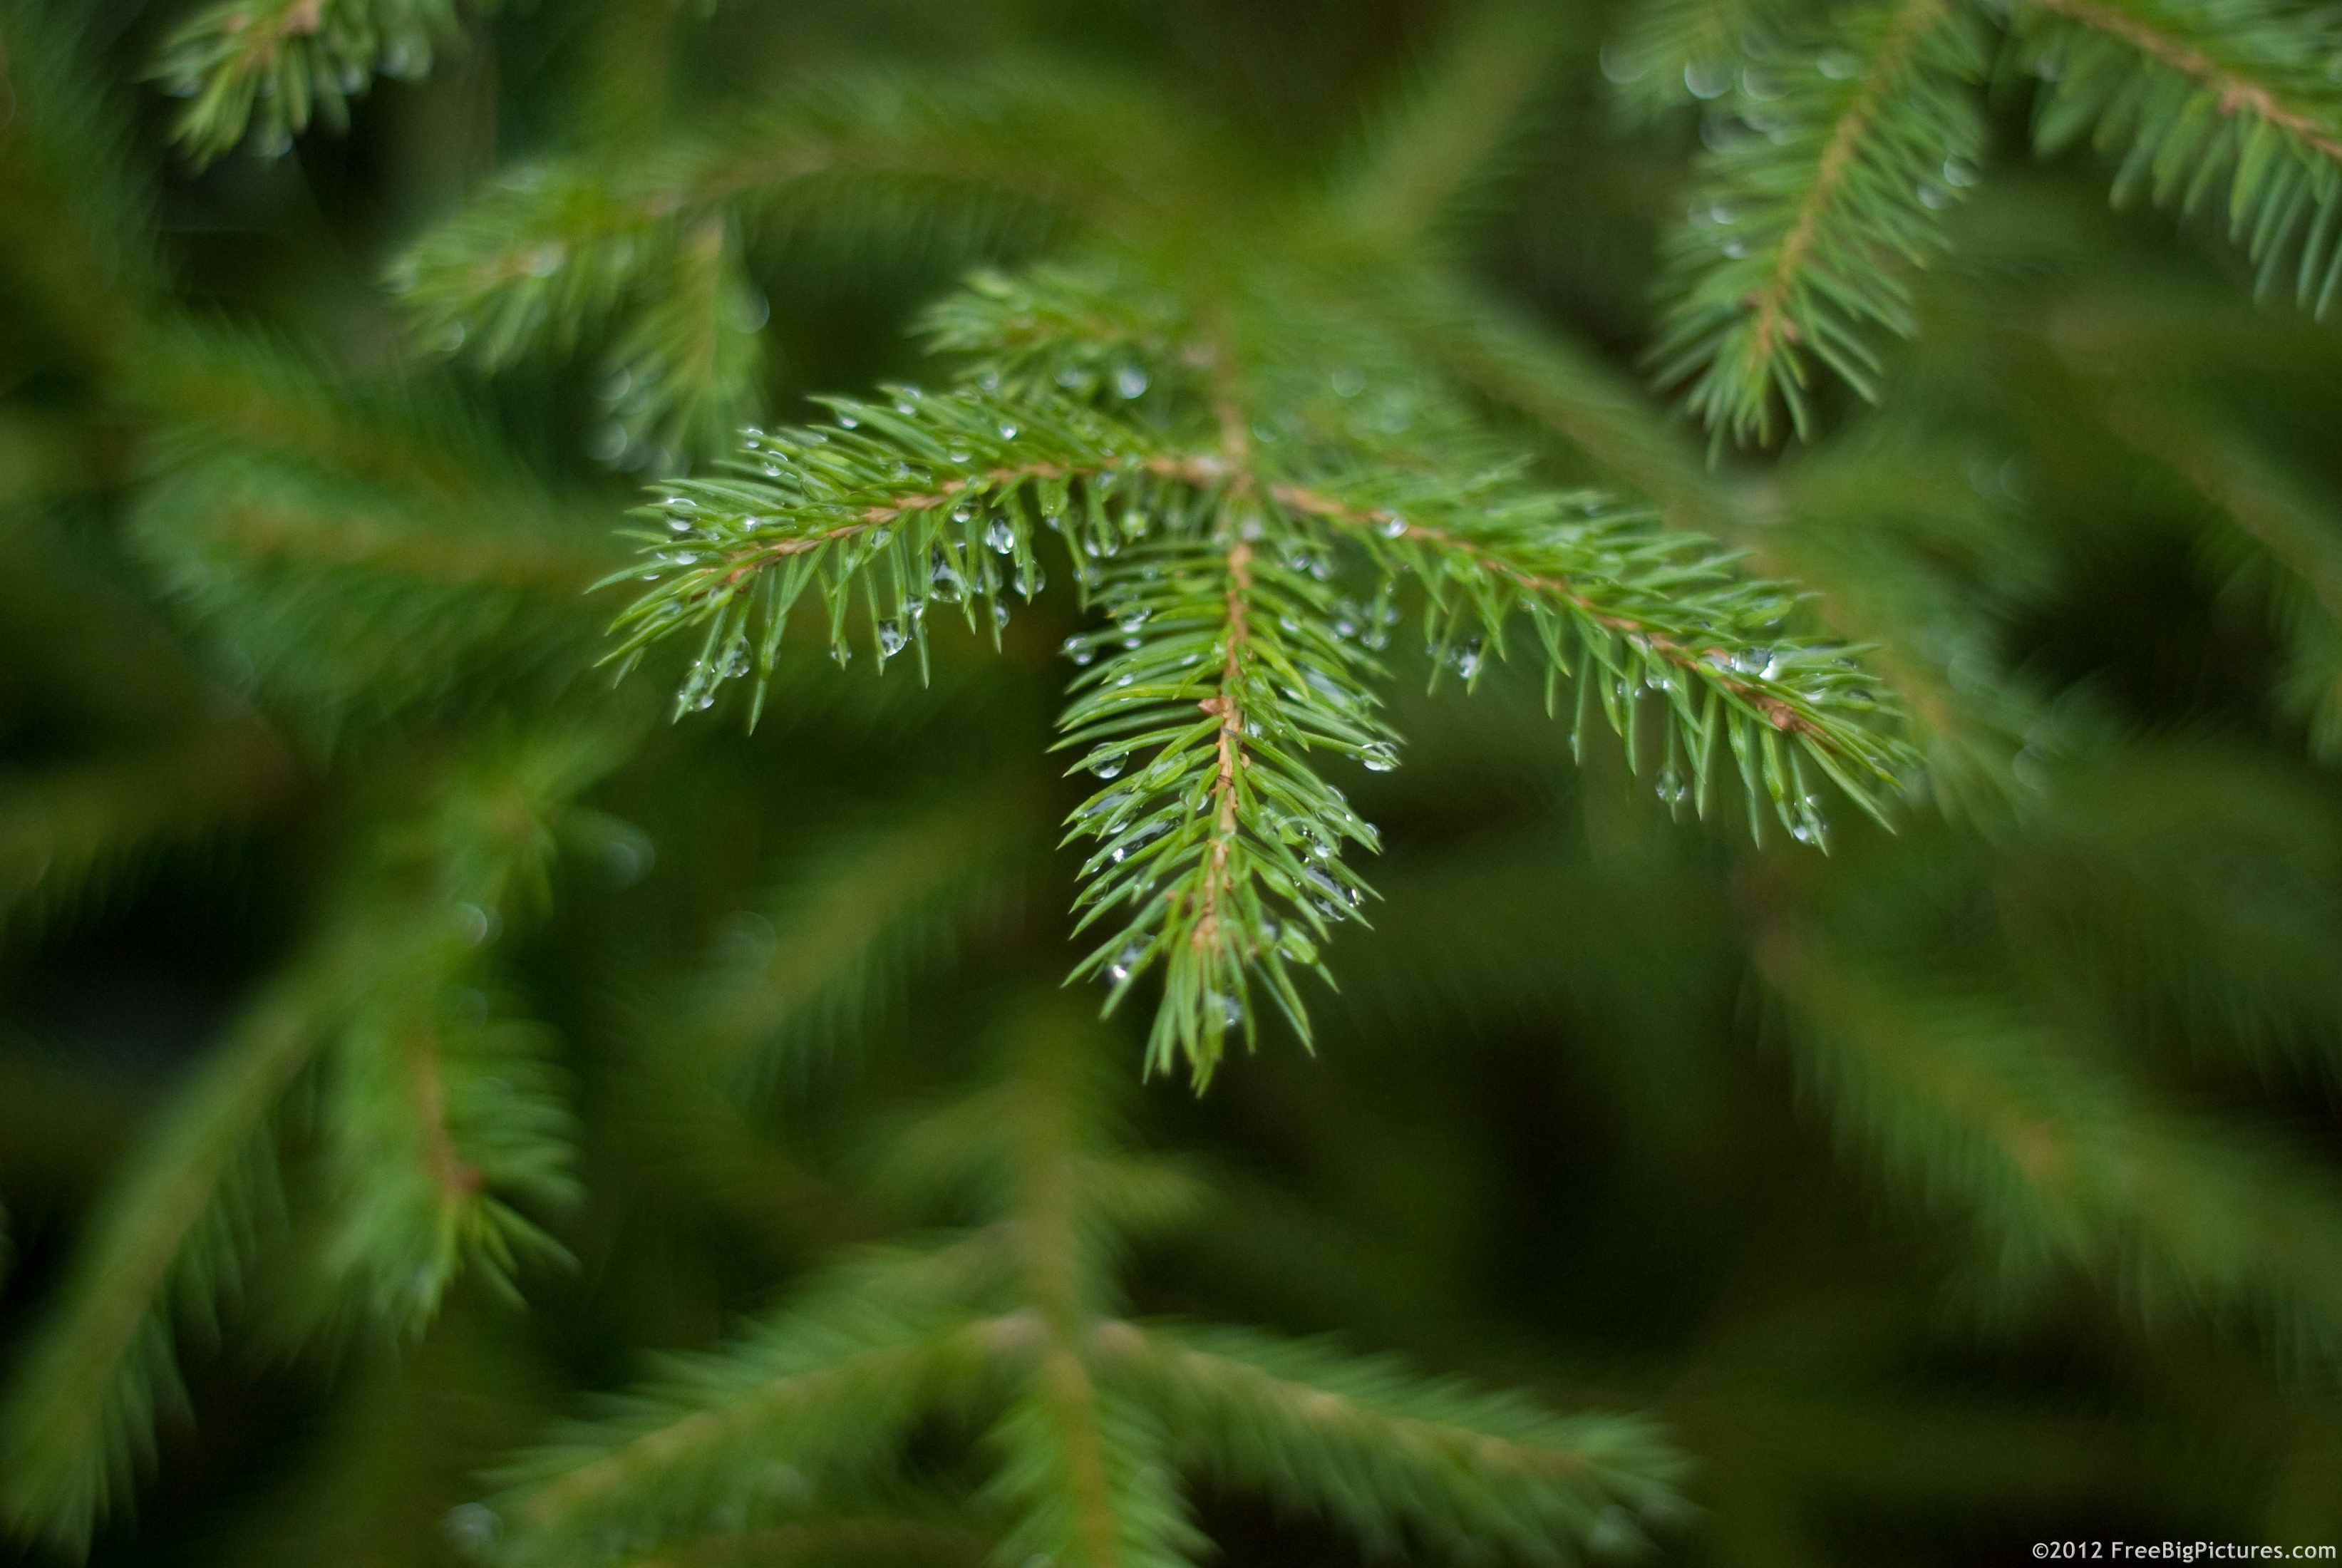 A fir branch with a lot of water drops on it